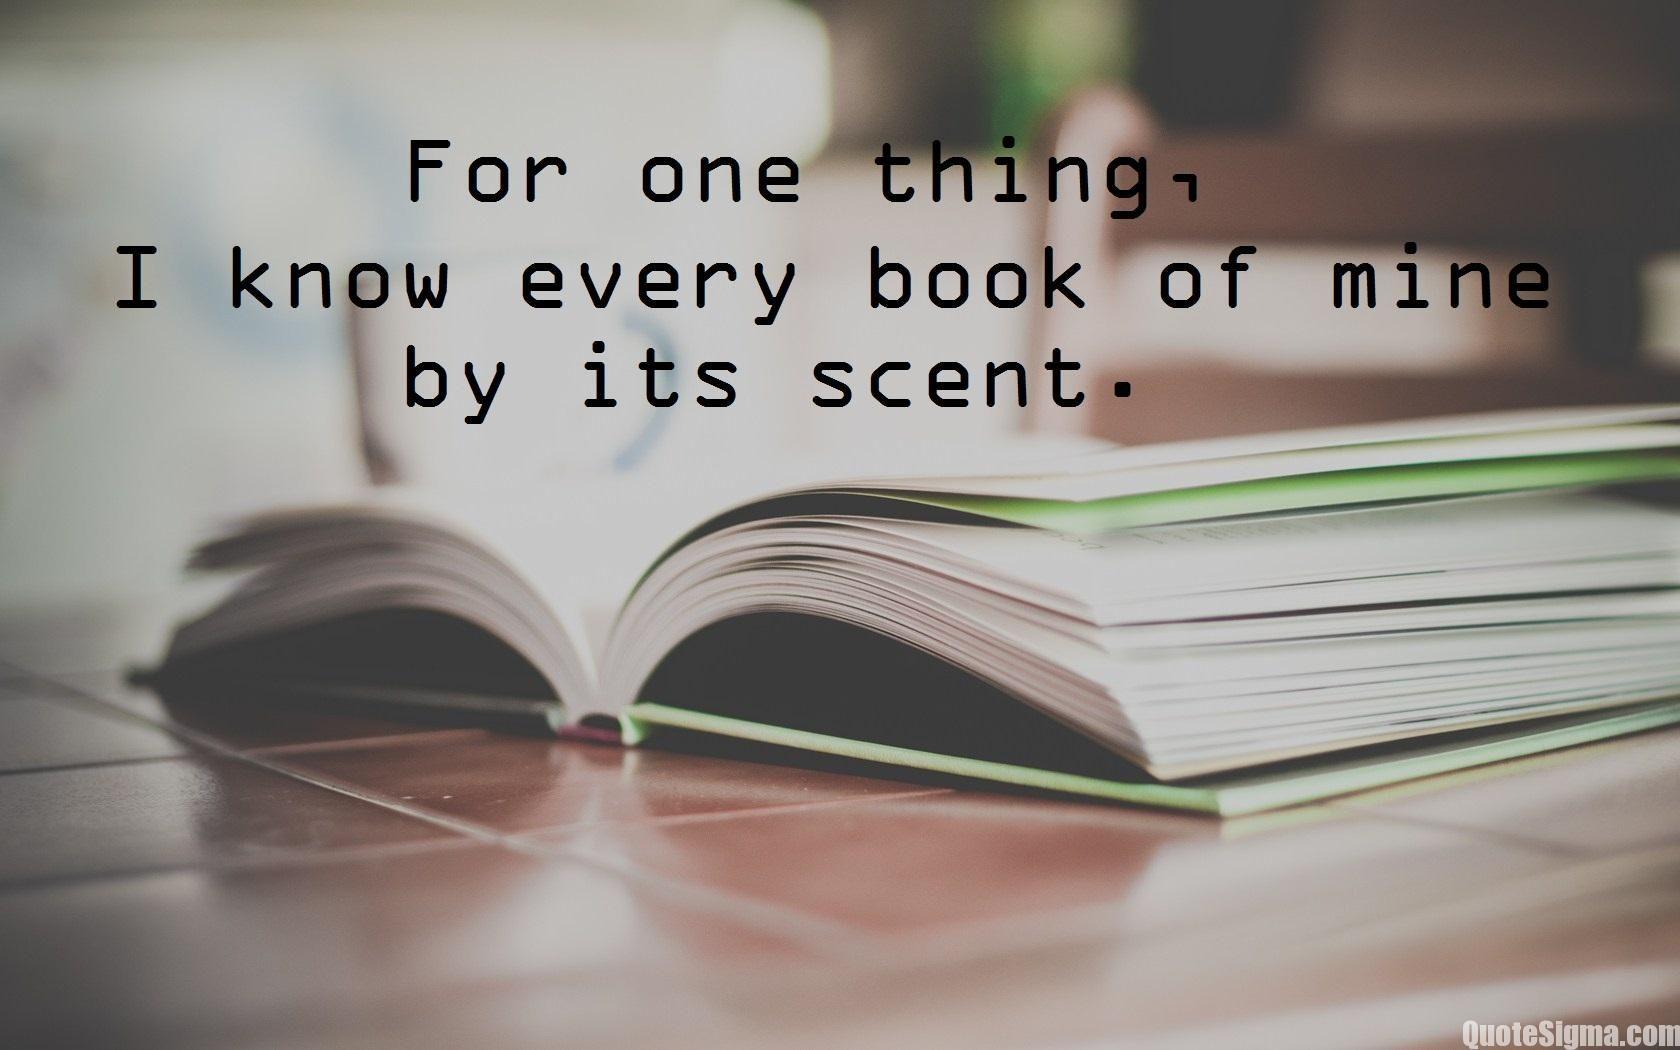 Book Lovers Quotes Best Book Lover Quotes. Quotes On Book Lovers